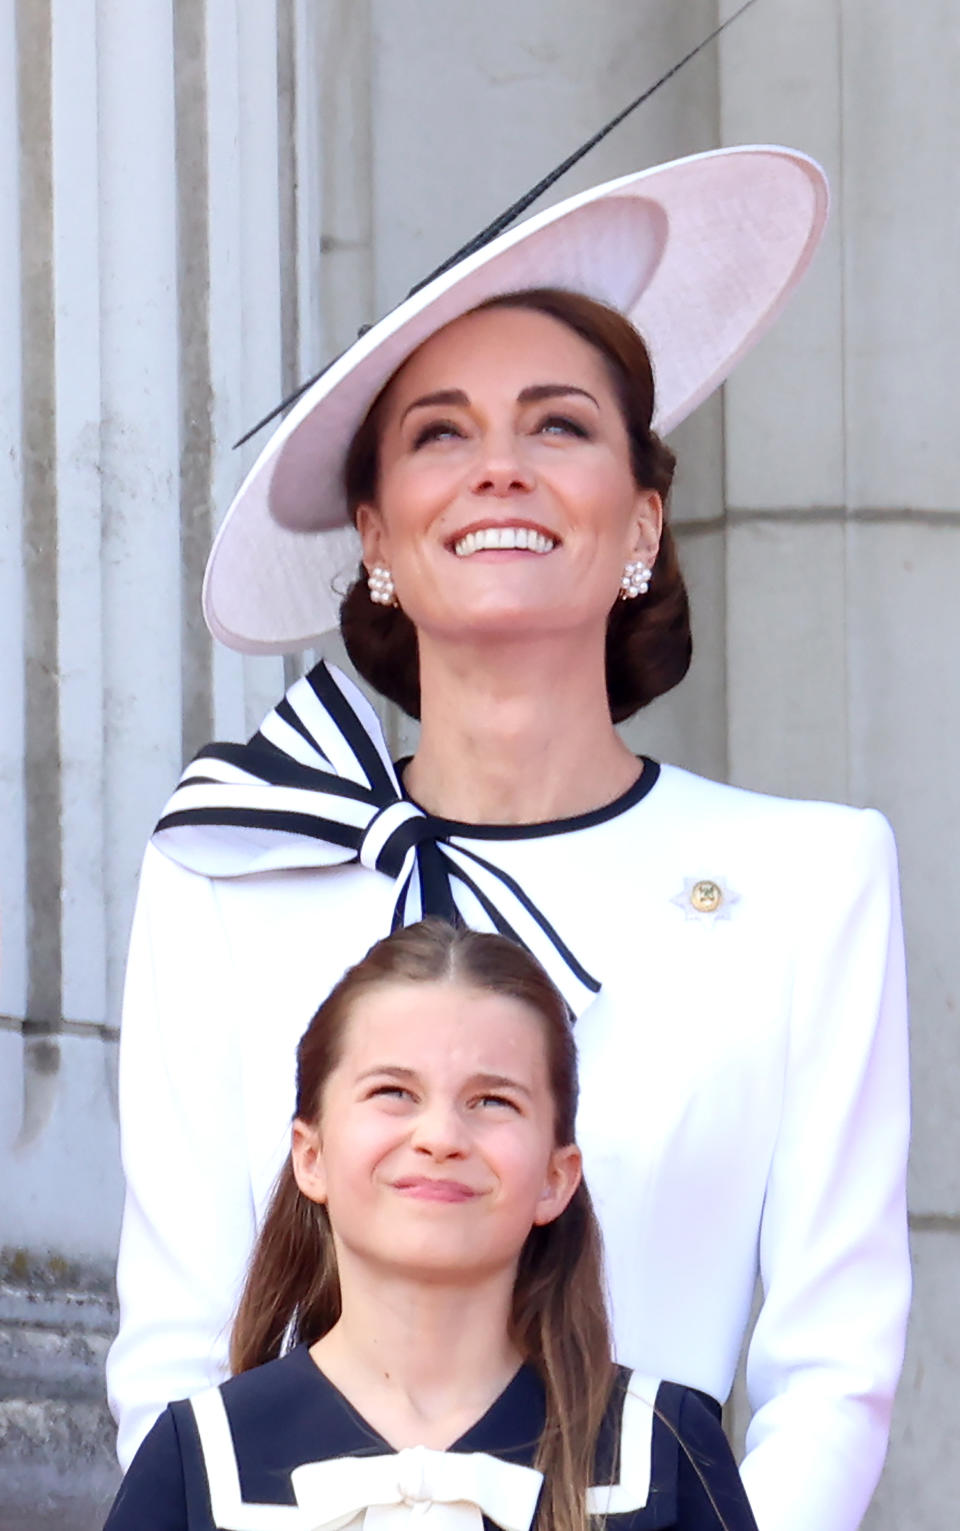 Kate Middleton wears a stylish wide-brim hat and elegant outfit alongside Princess Charlotte, who is wearing a sailor-style dress